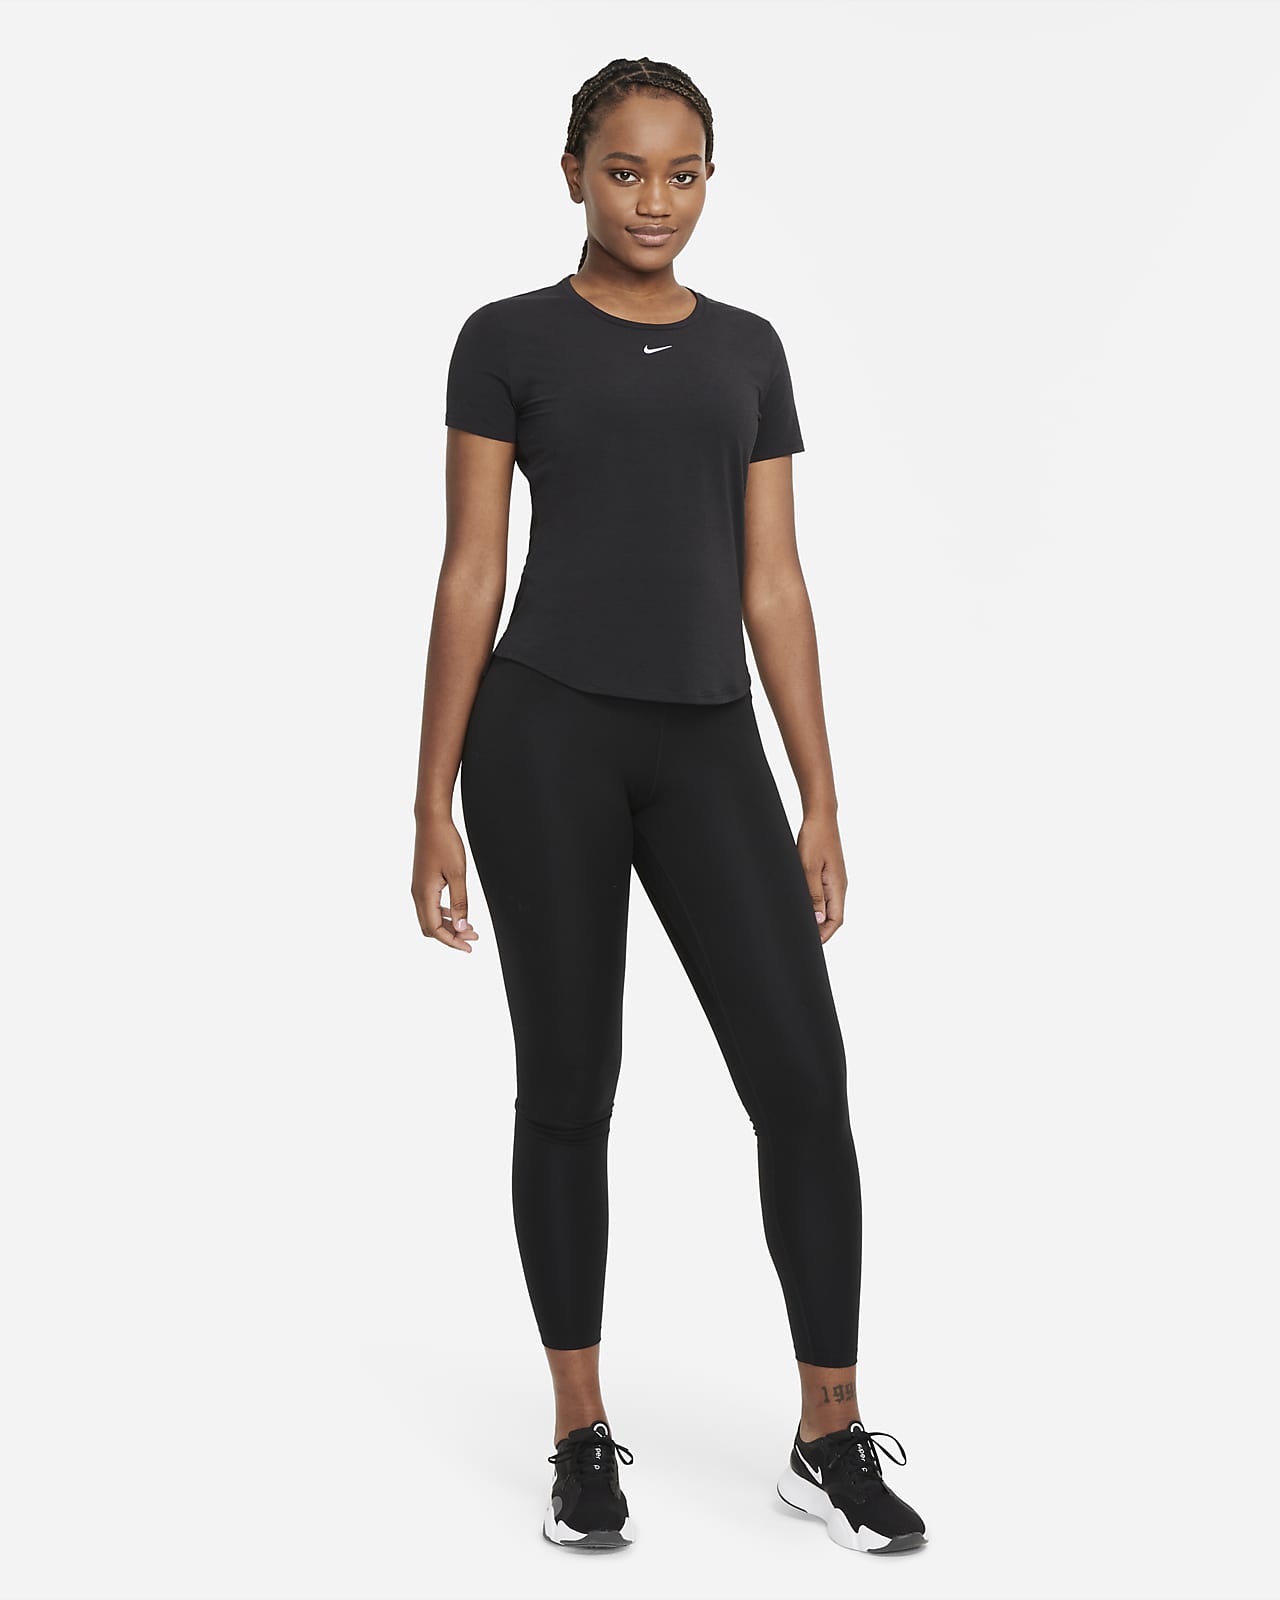 Yoga luxe t-shirt with short sleeves, black, Nike